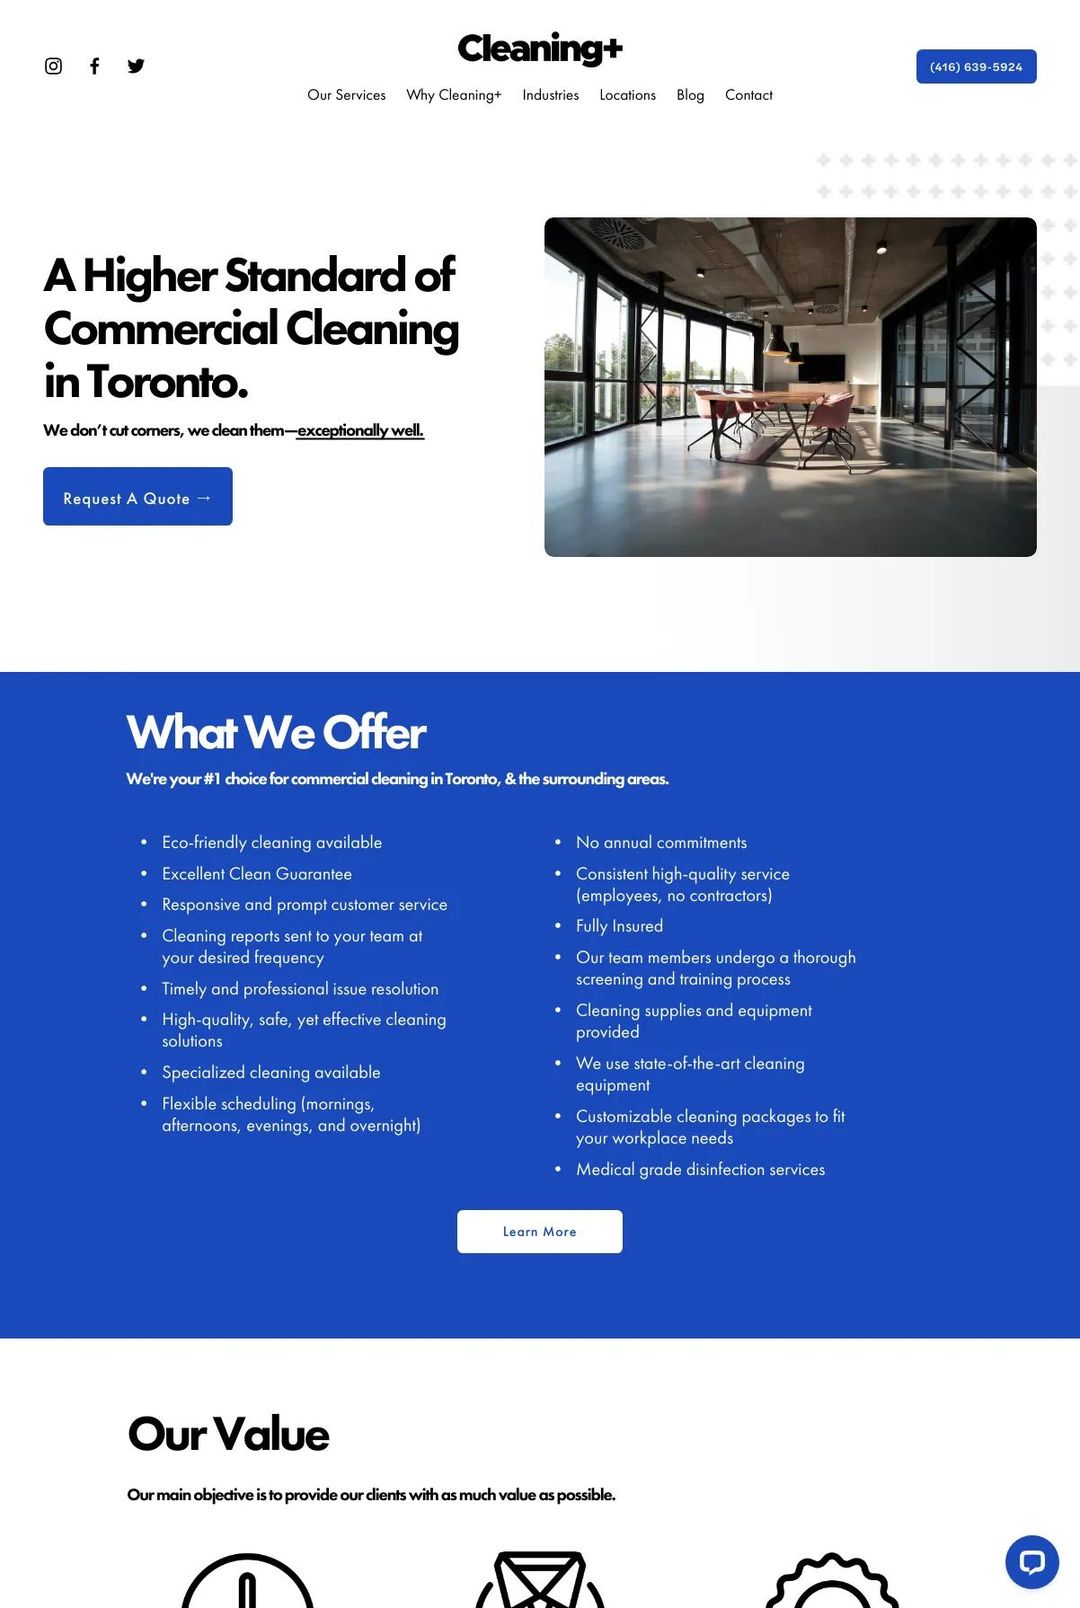 Screenshot 1 of Cleaning+ (Example Squarespace Cleaning Services Website)